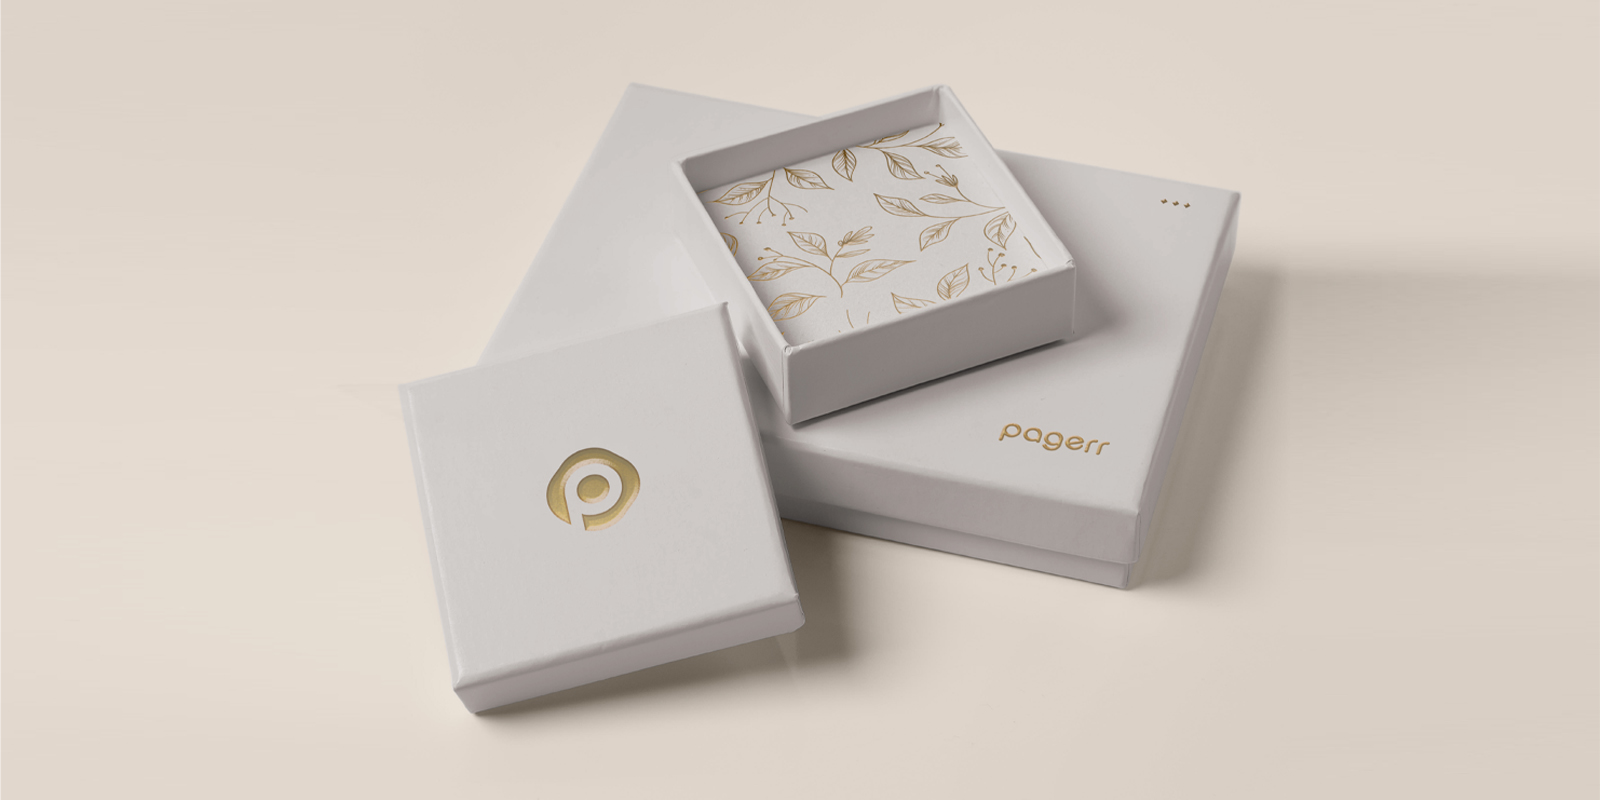 Product boxes in Logan City - Print with Pagerr